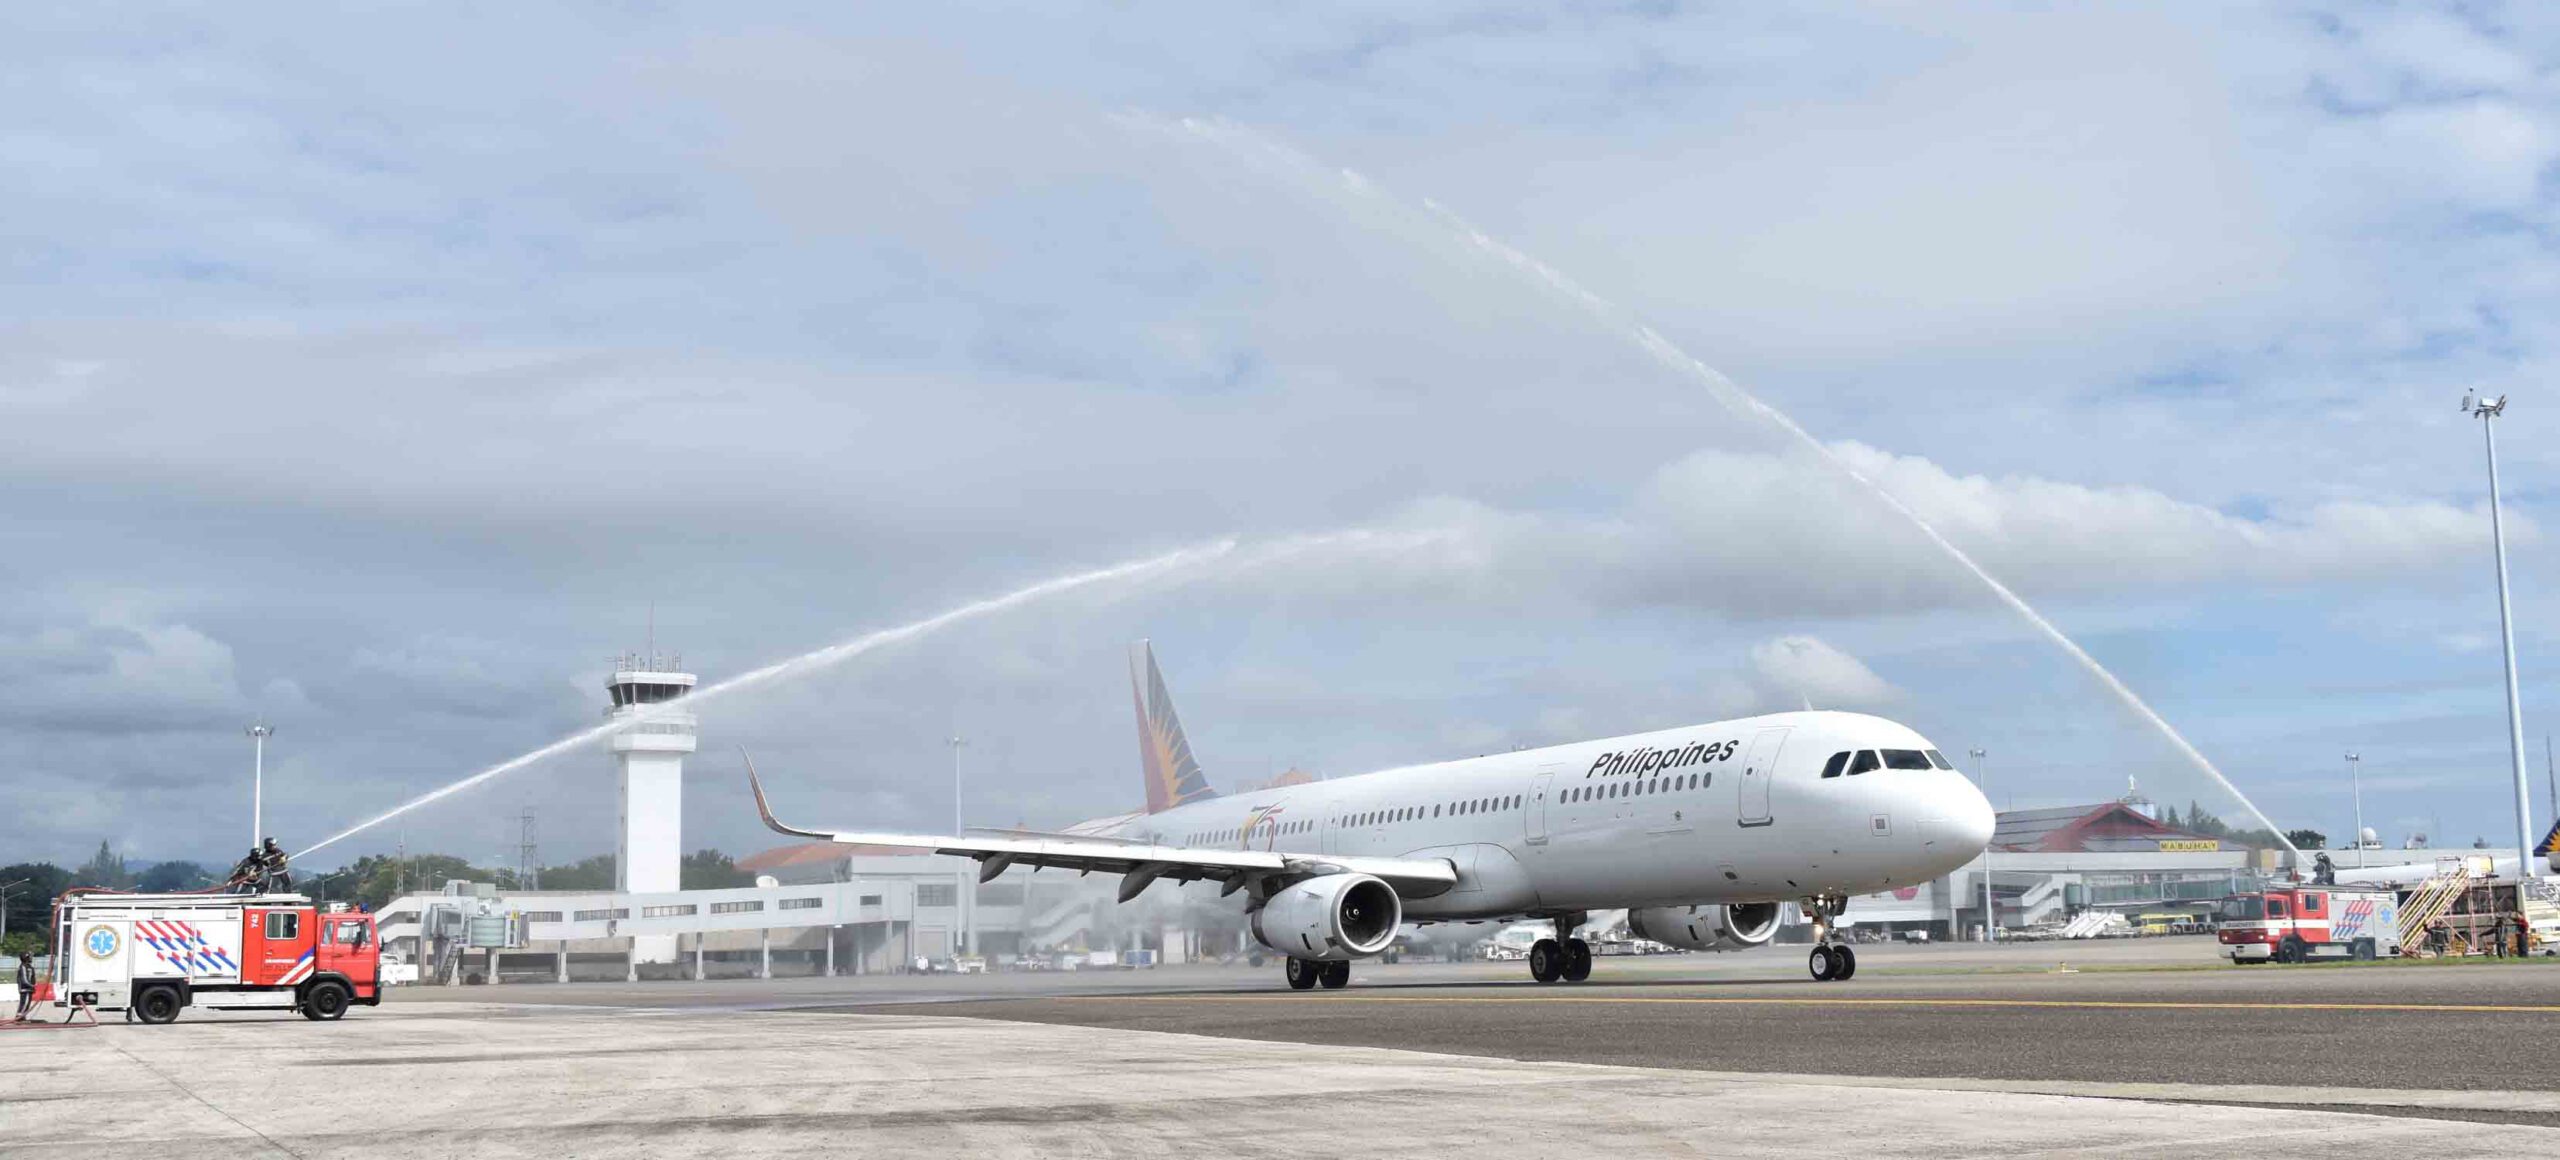 PAL to add 8 new domestic routes from Clark, Cebu